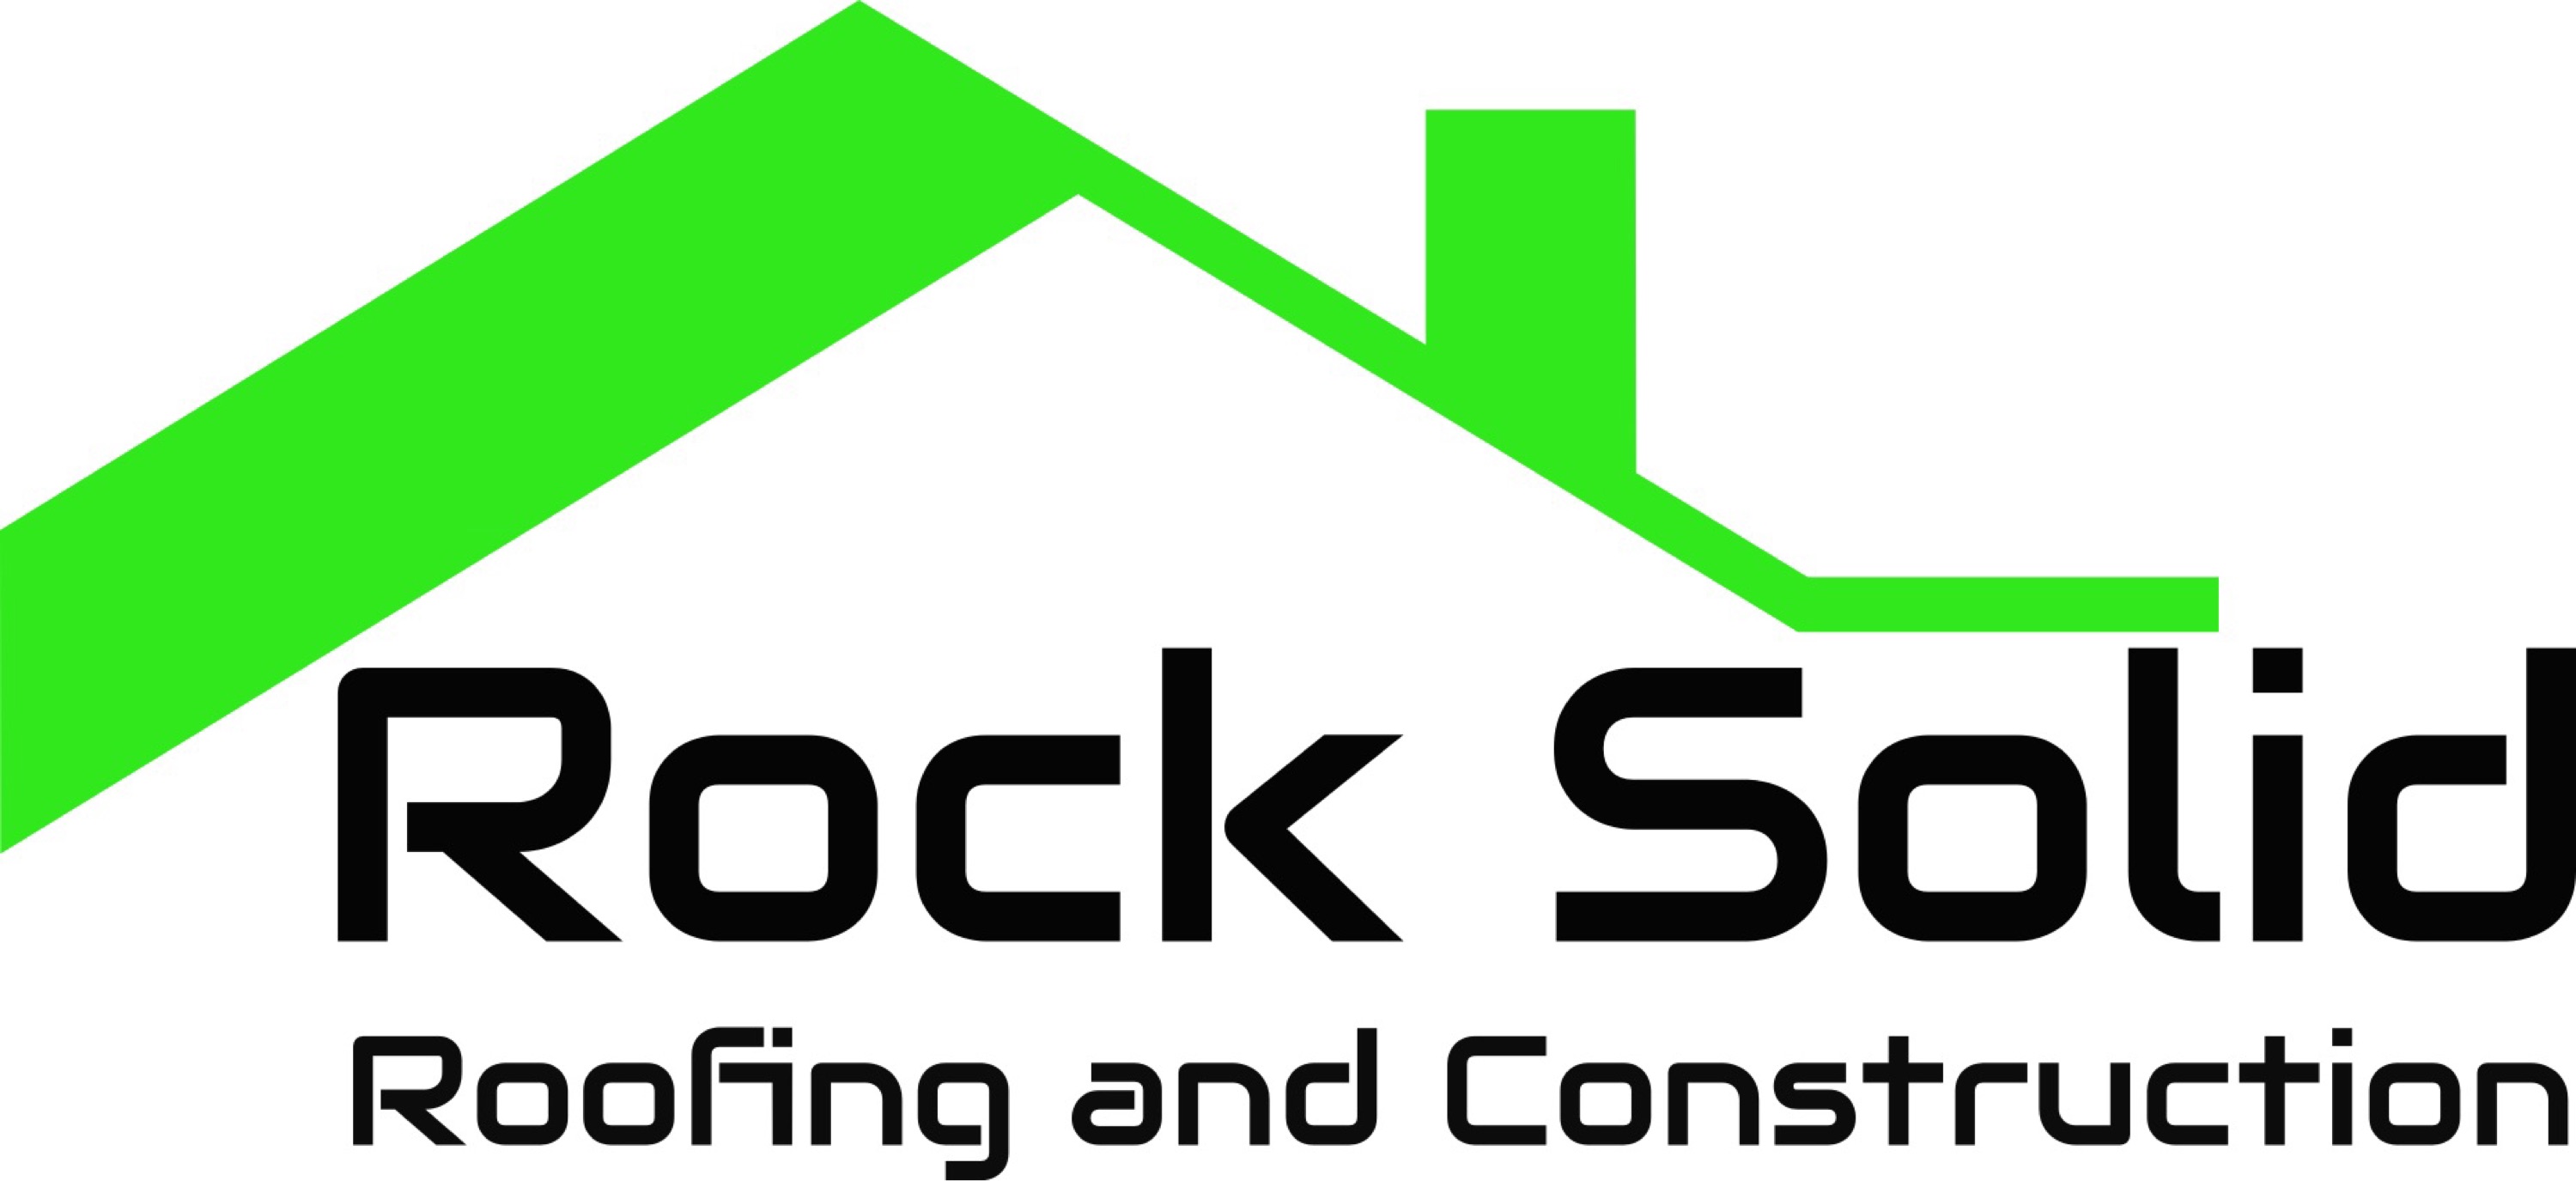 Rock Solid Roofing & Construction Logo